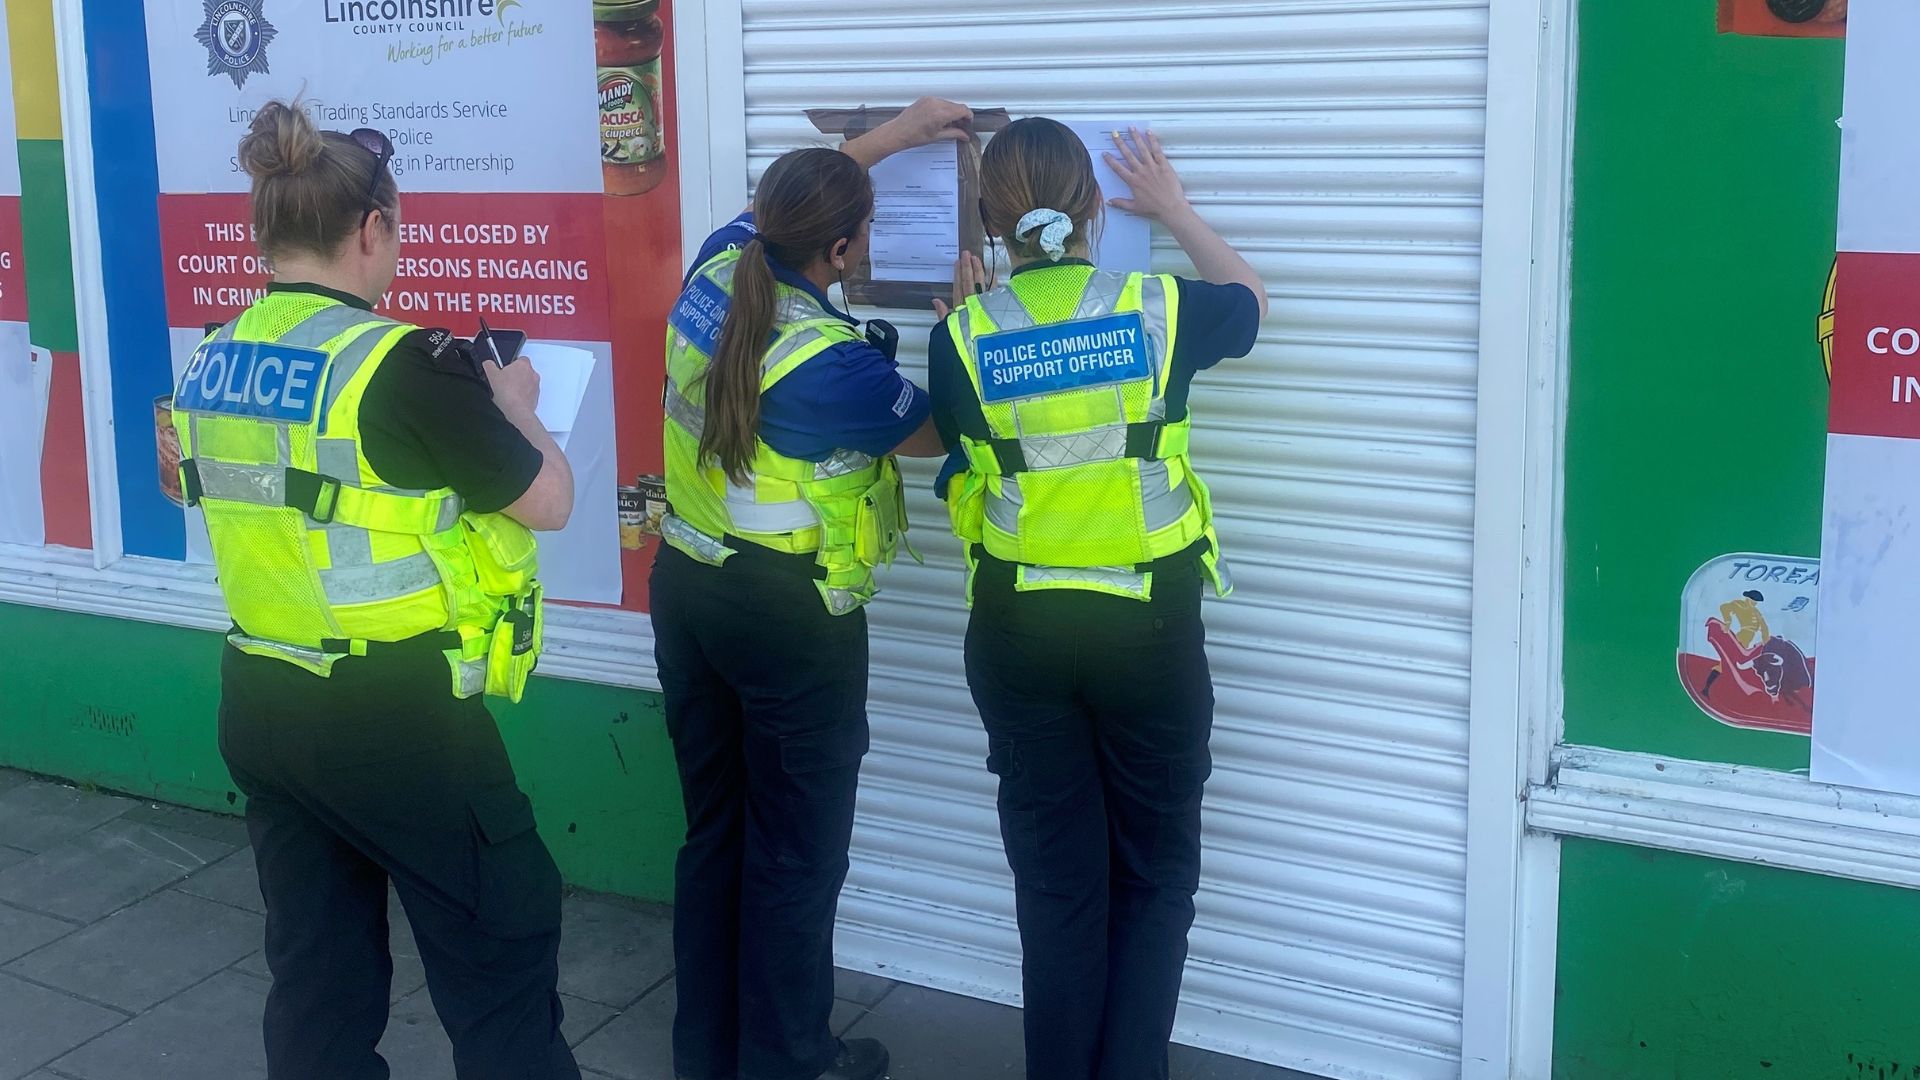 Police community officers shutting down a shop and adding enforcement notices to the window.